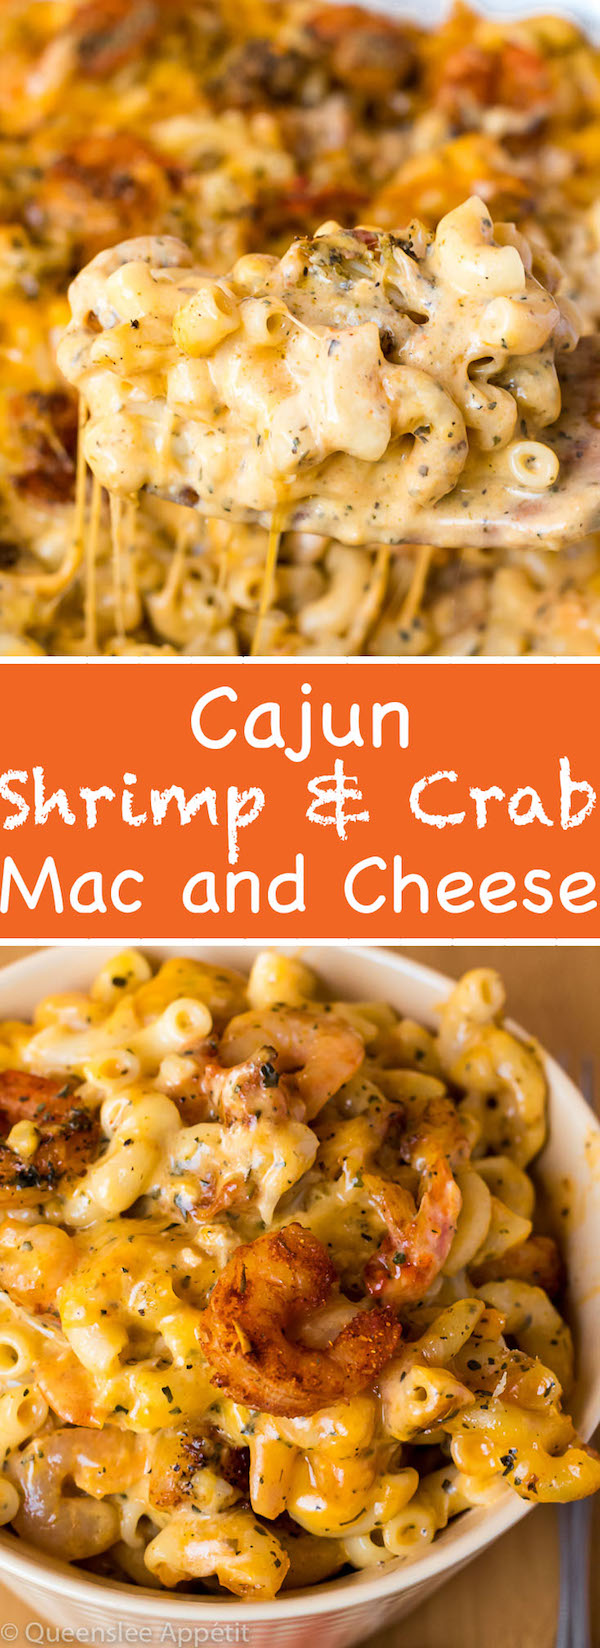 This Cajun Shrimp and Crab Mac and Cheese is super creamy, cheesy and decadent. This delicious spin to the classic dish will surely be your new favourite!